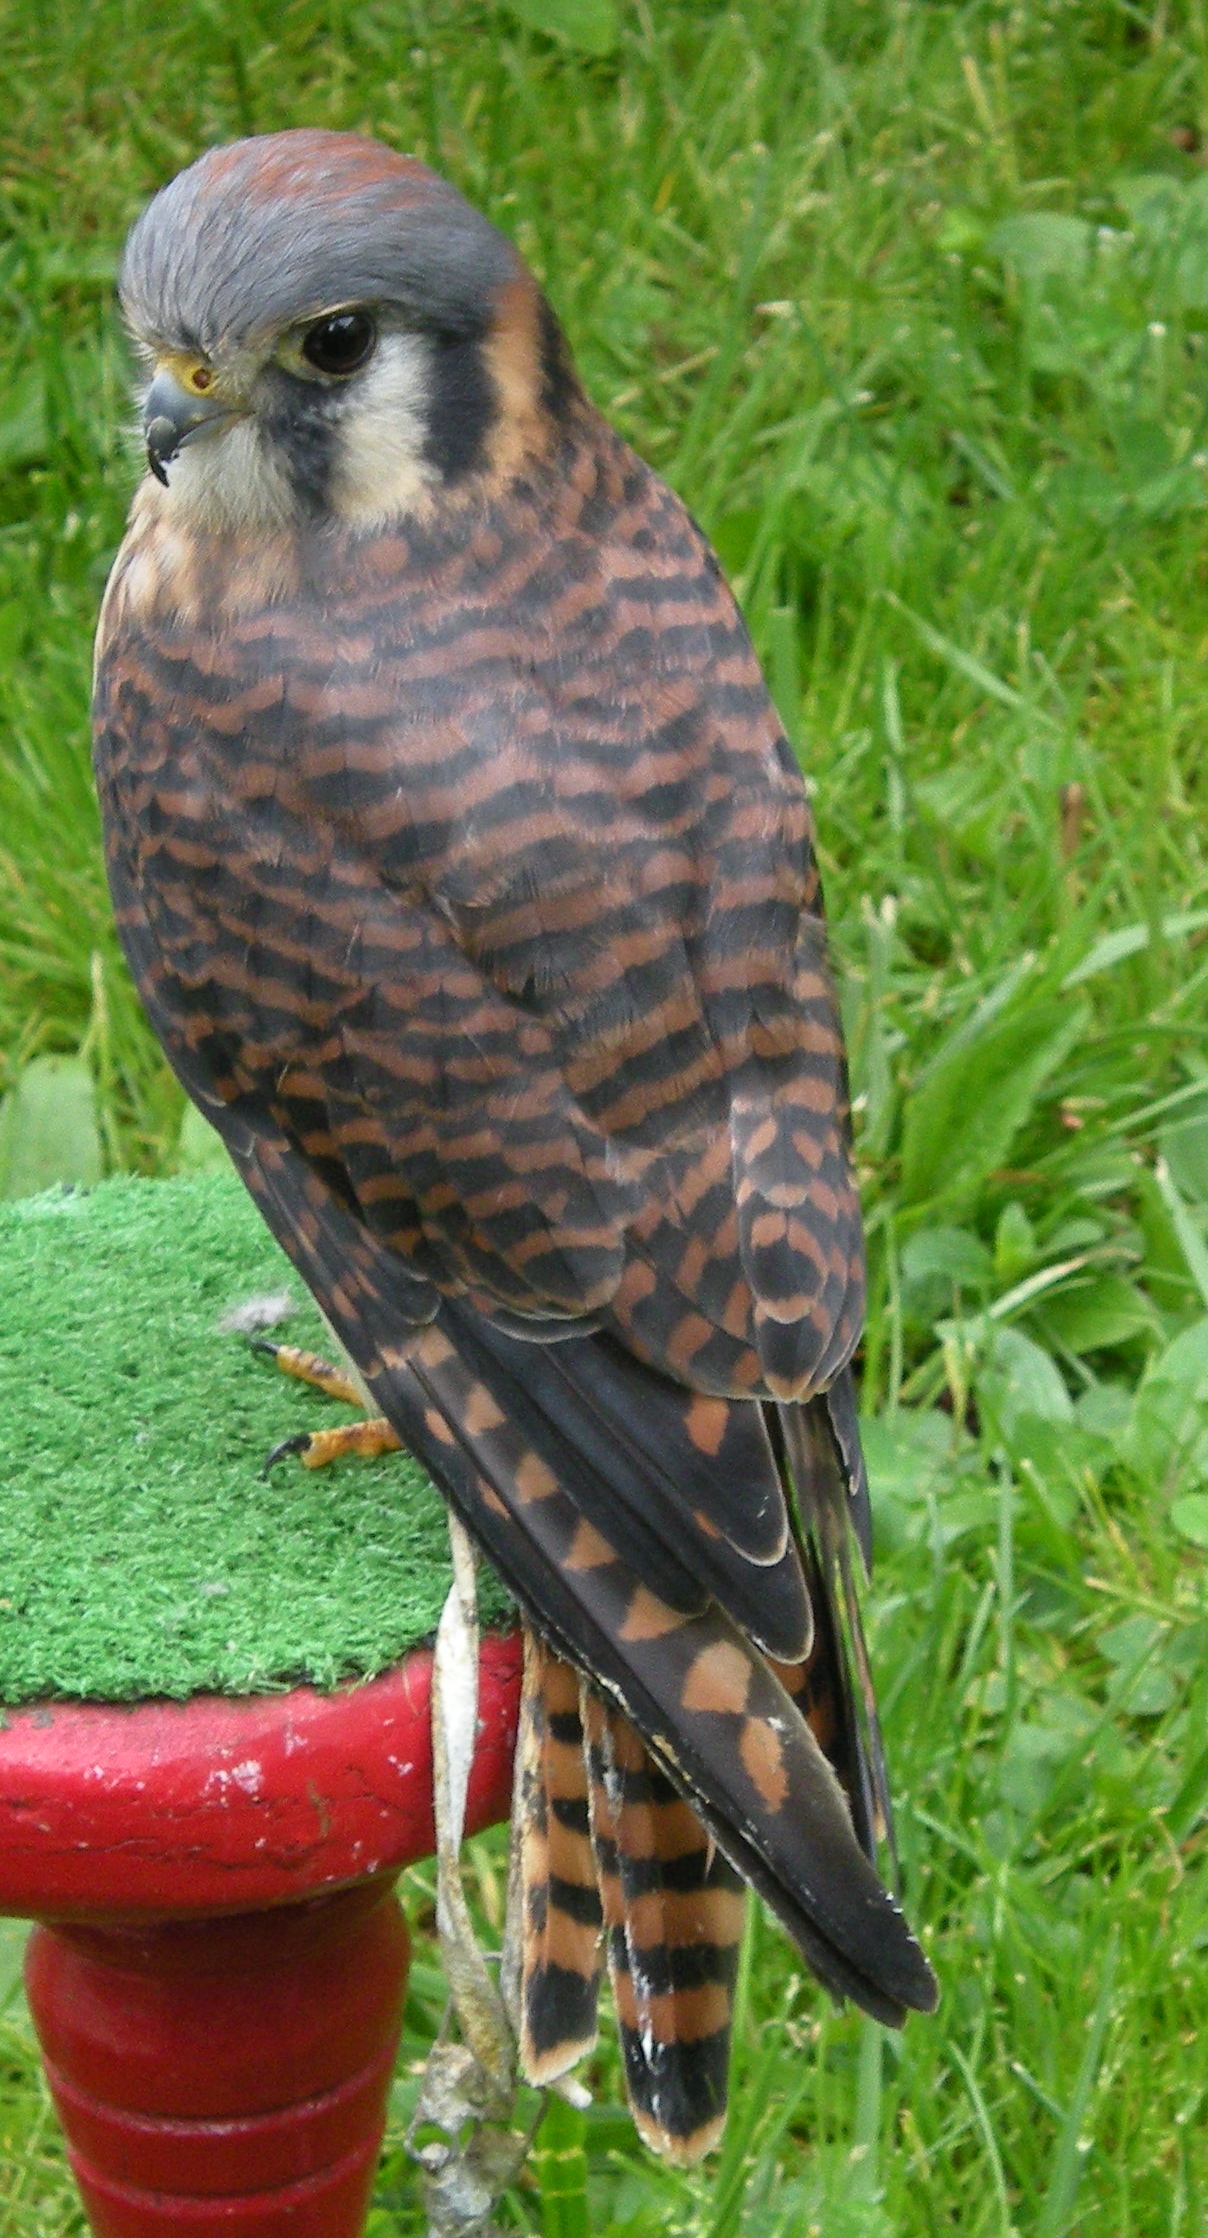 Live Birds of Prey at Trailside “New Jersey’s Magnificent